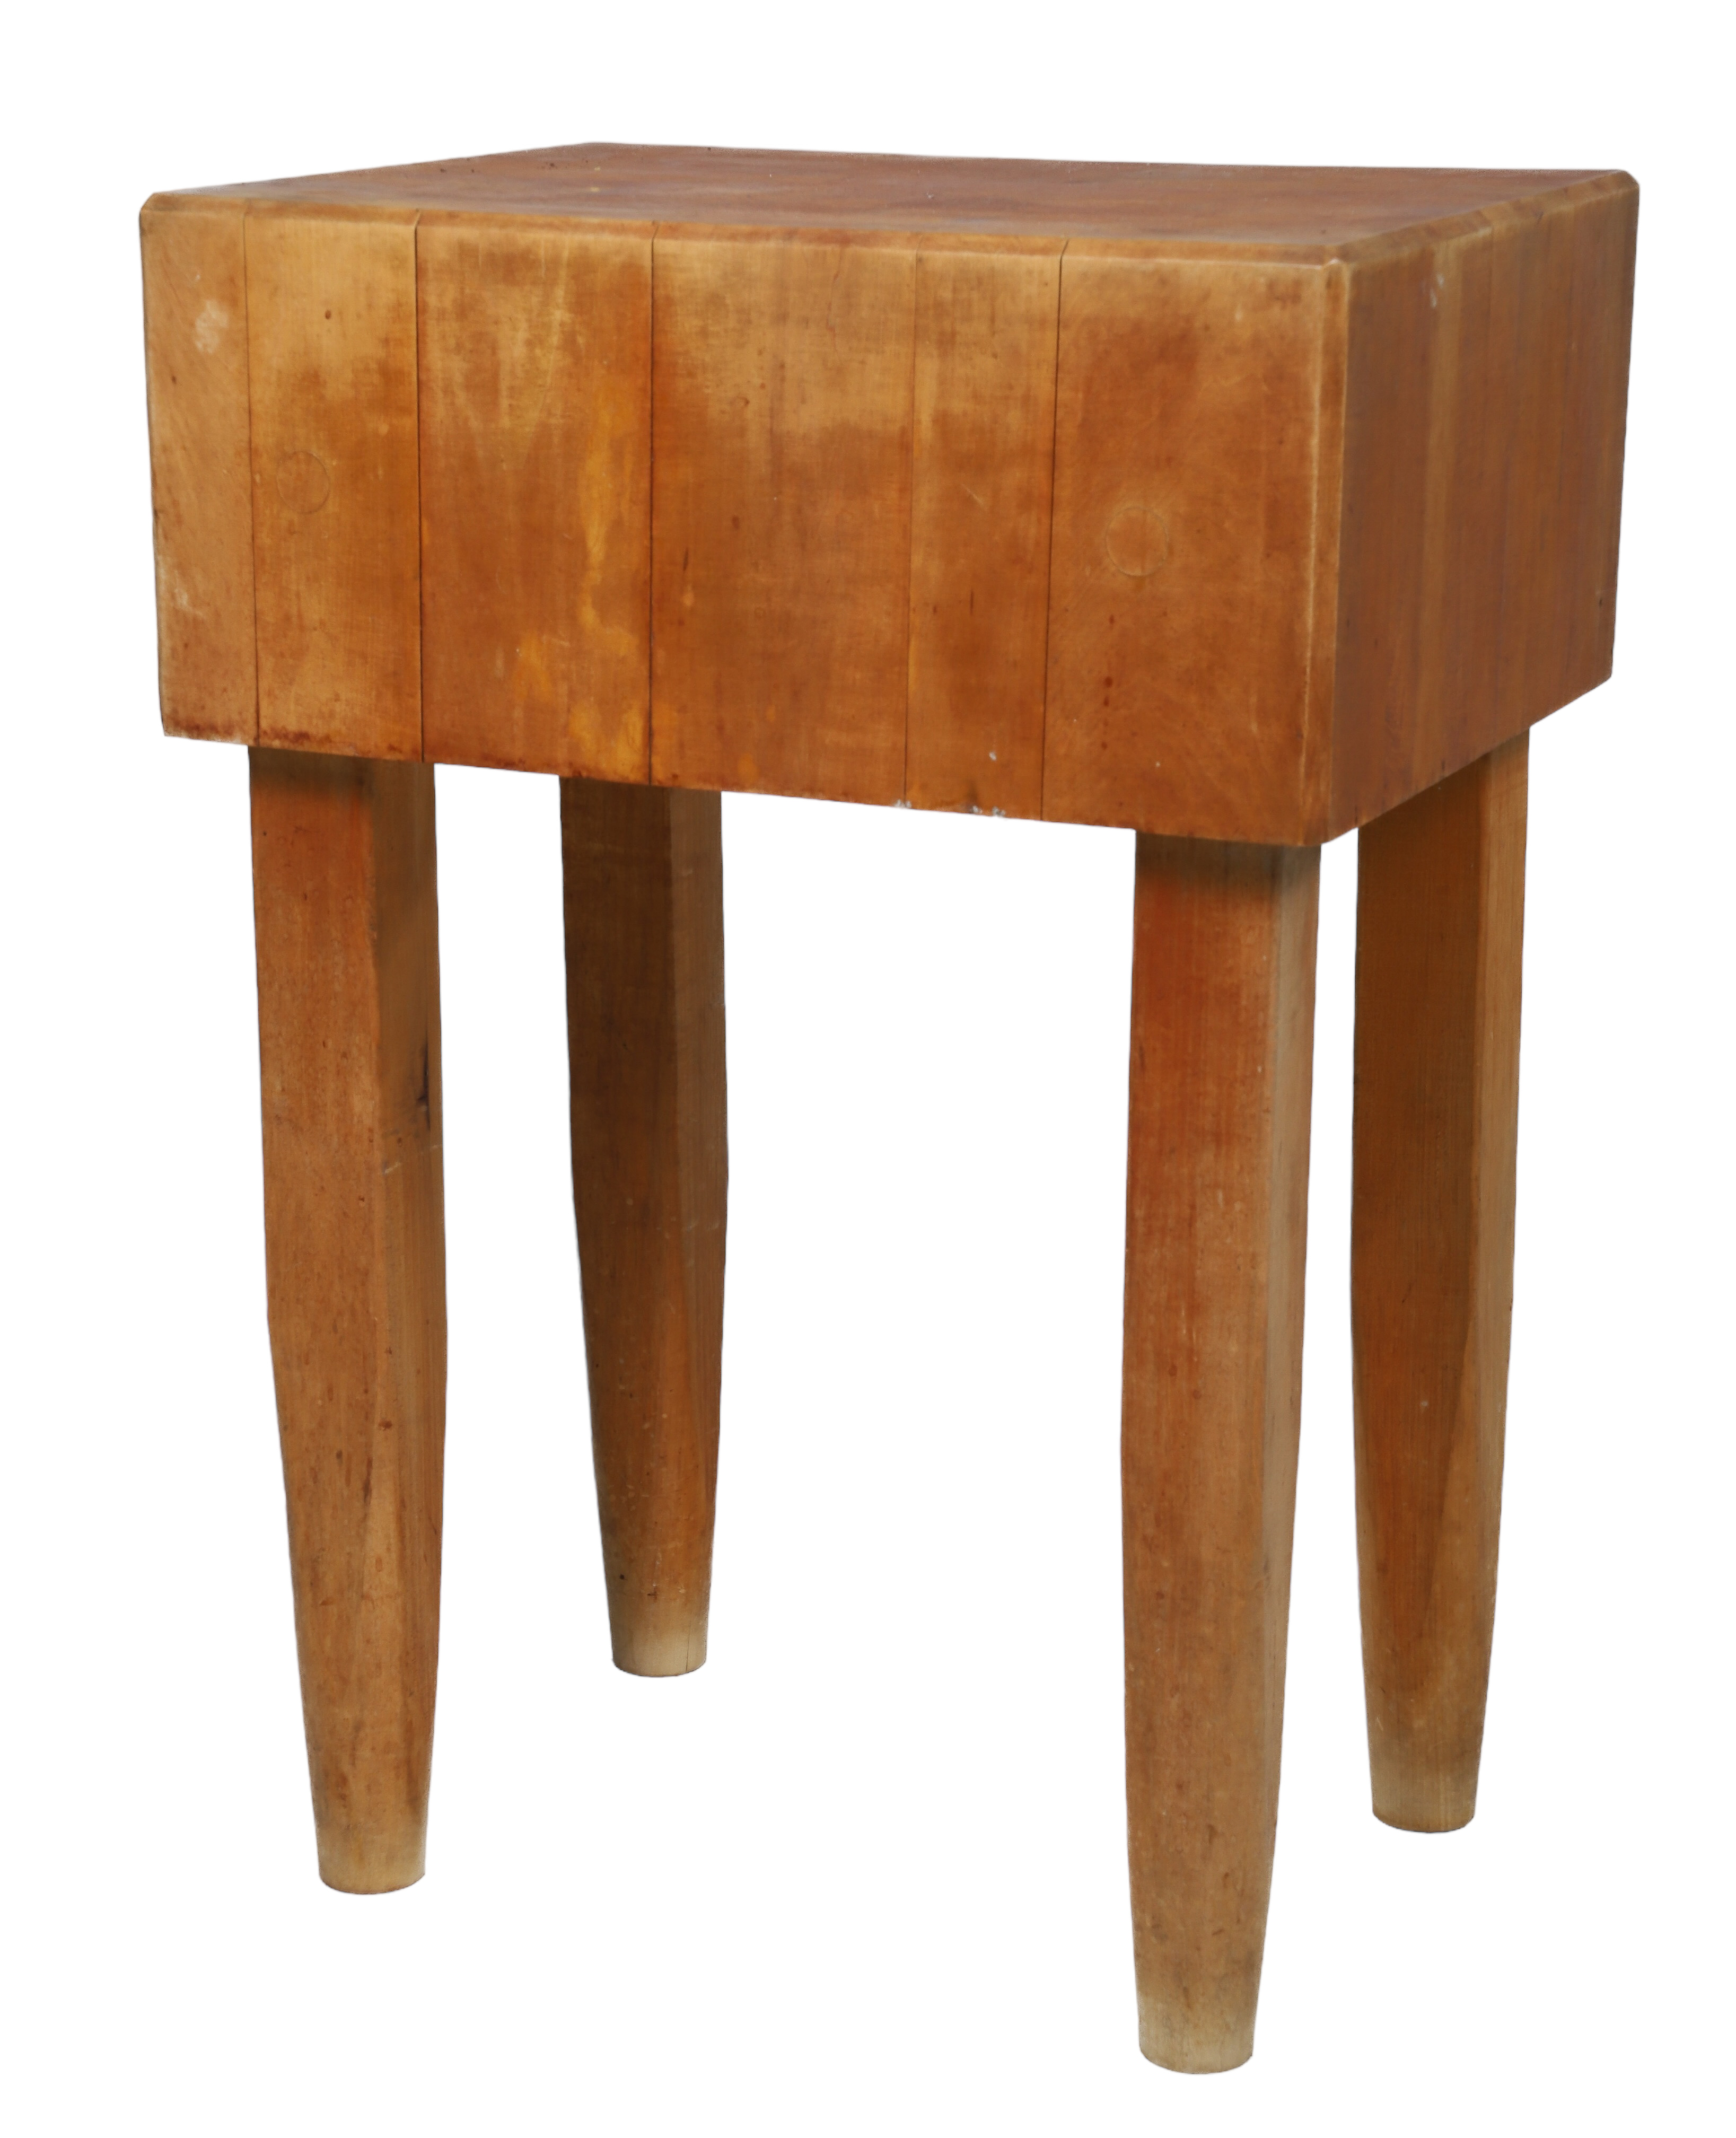 Maple butcher block table, on square